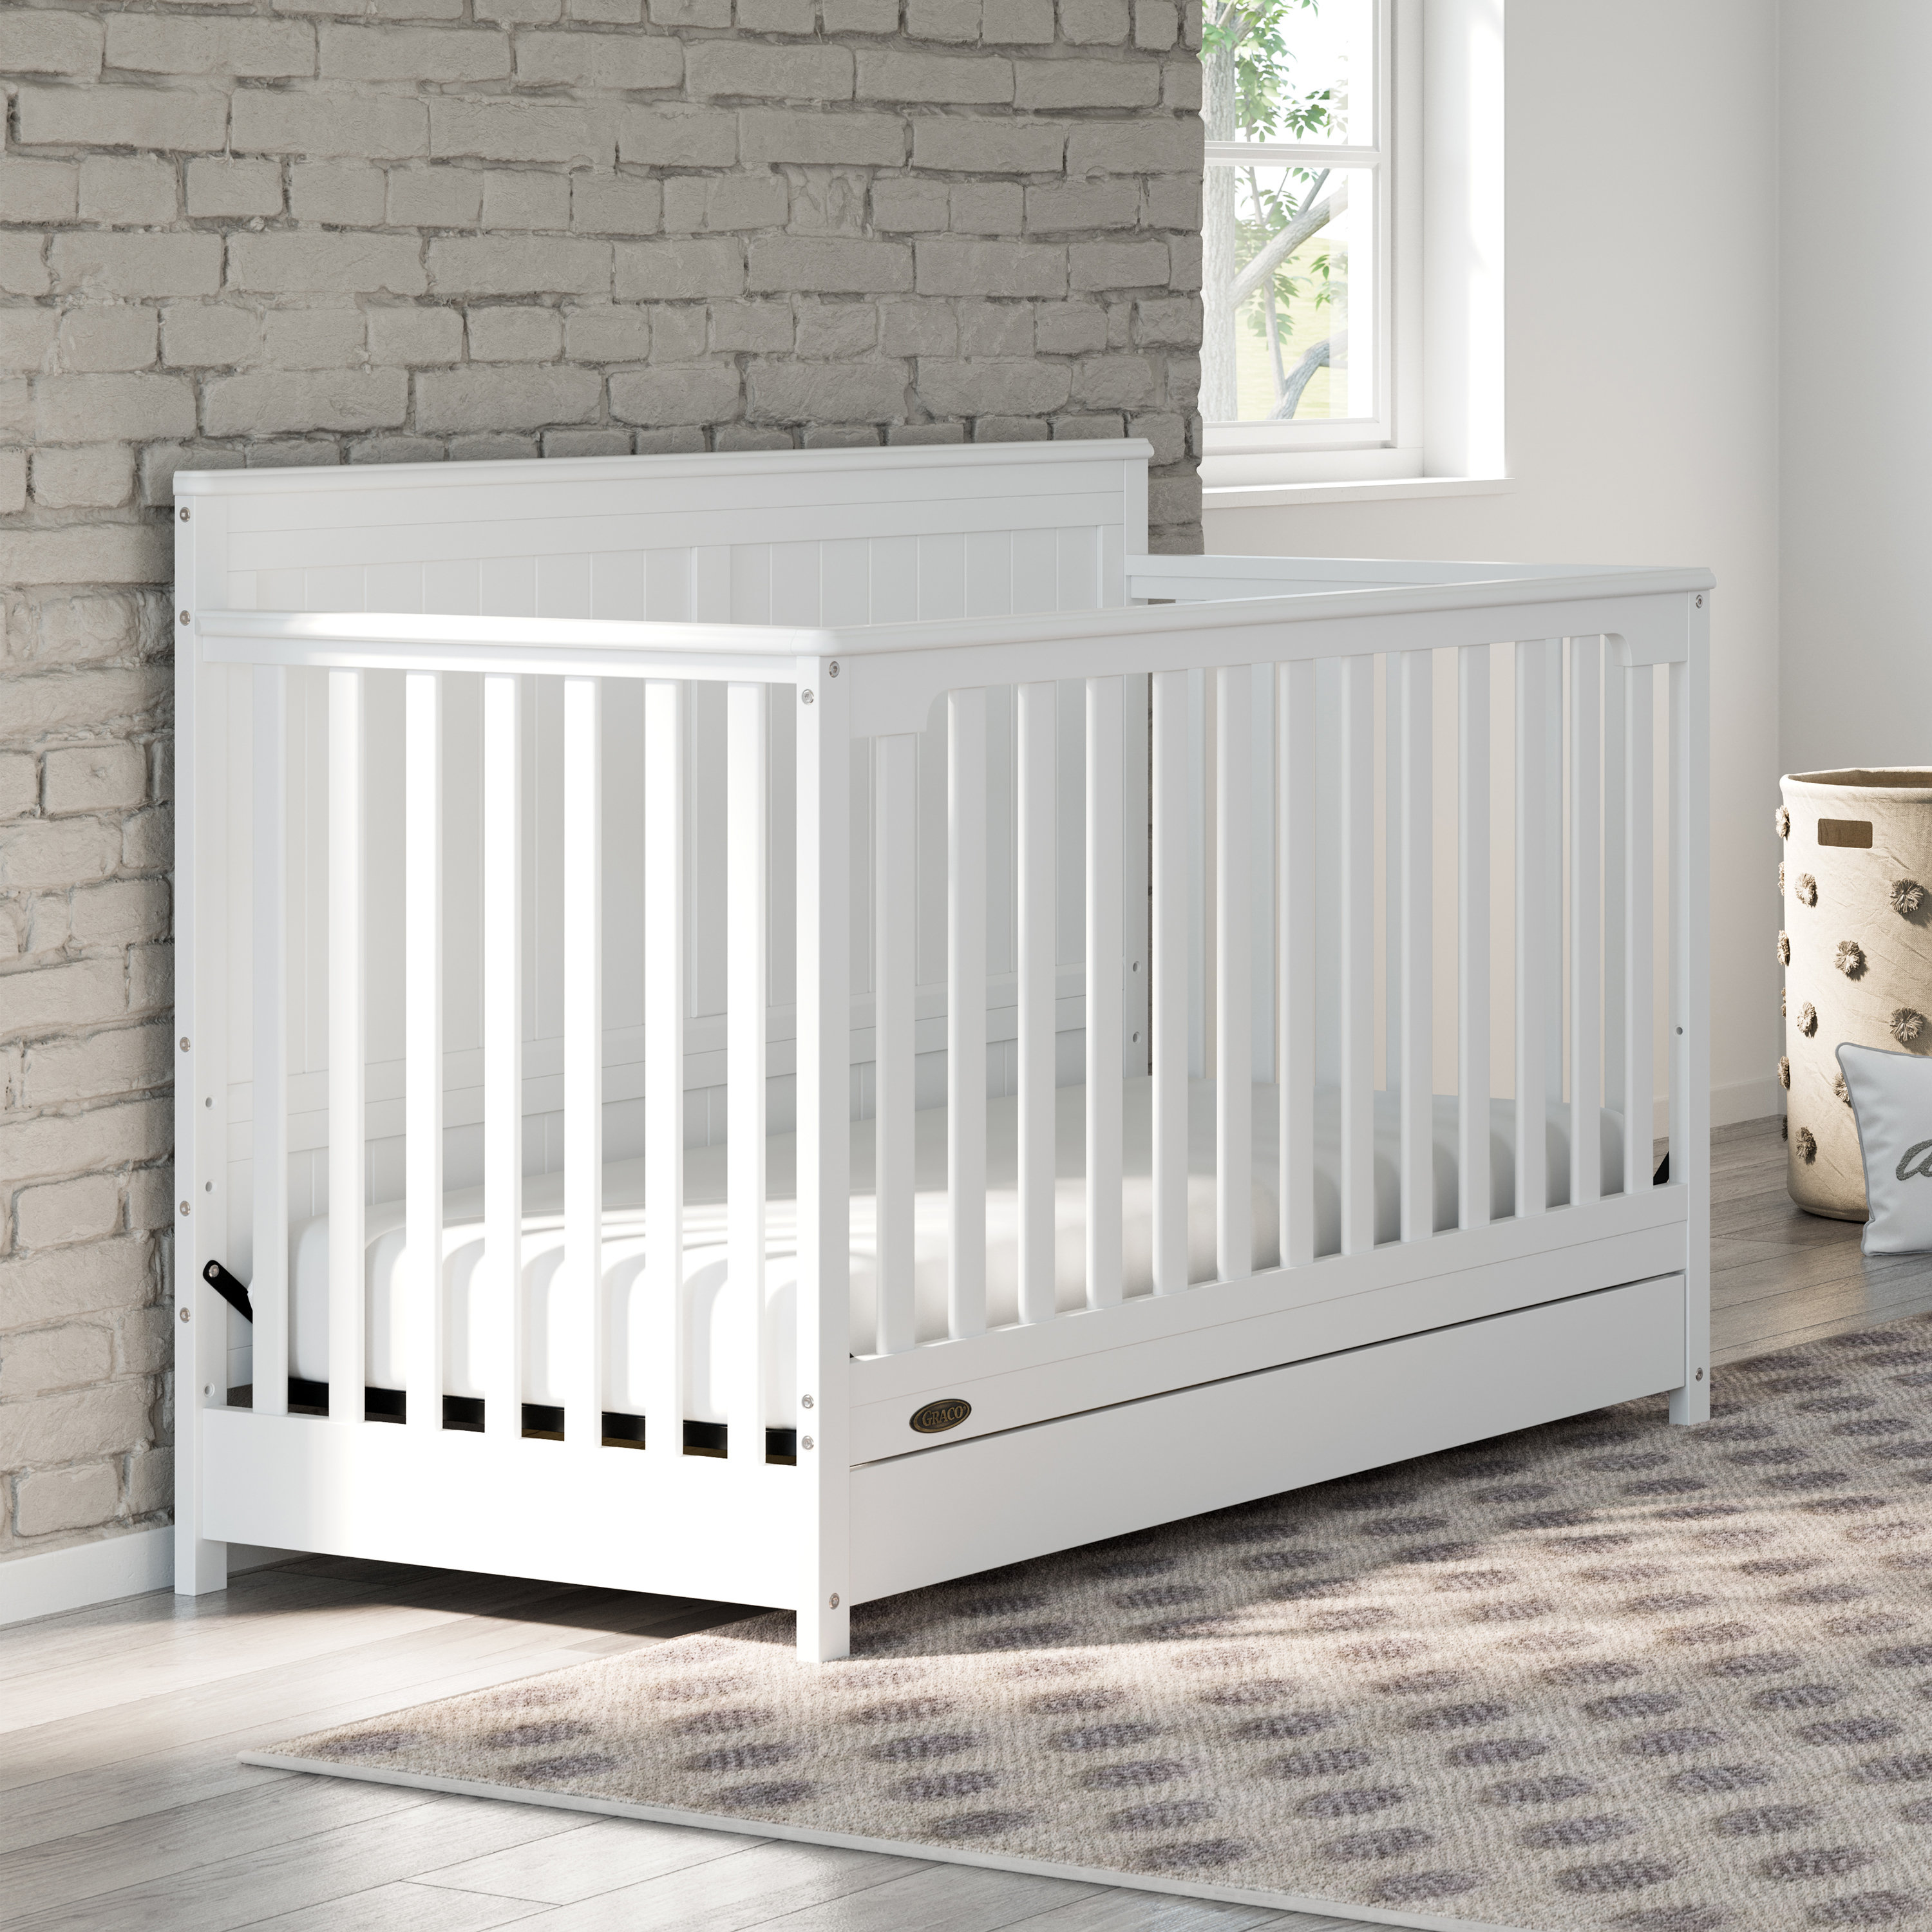 graco 4 in one crib